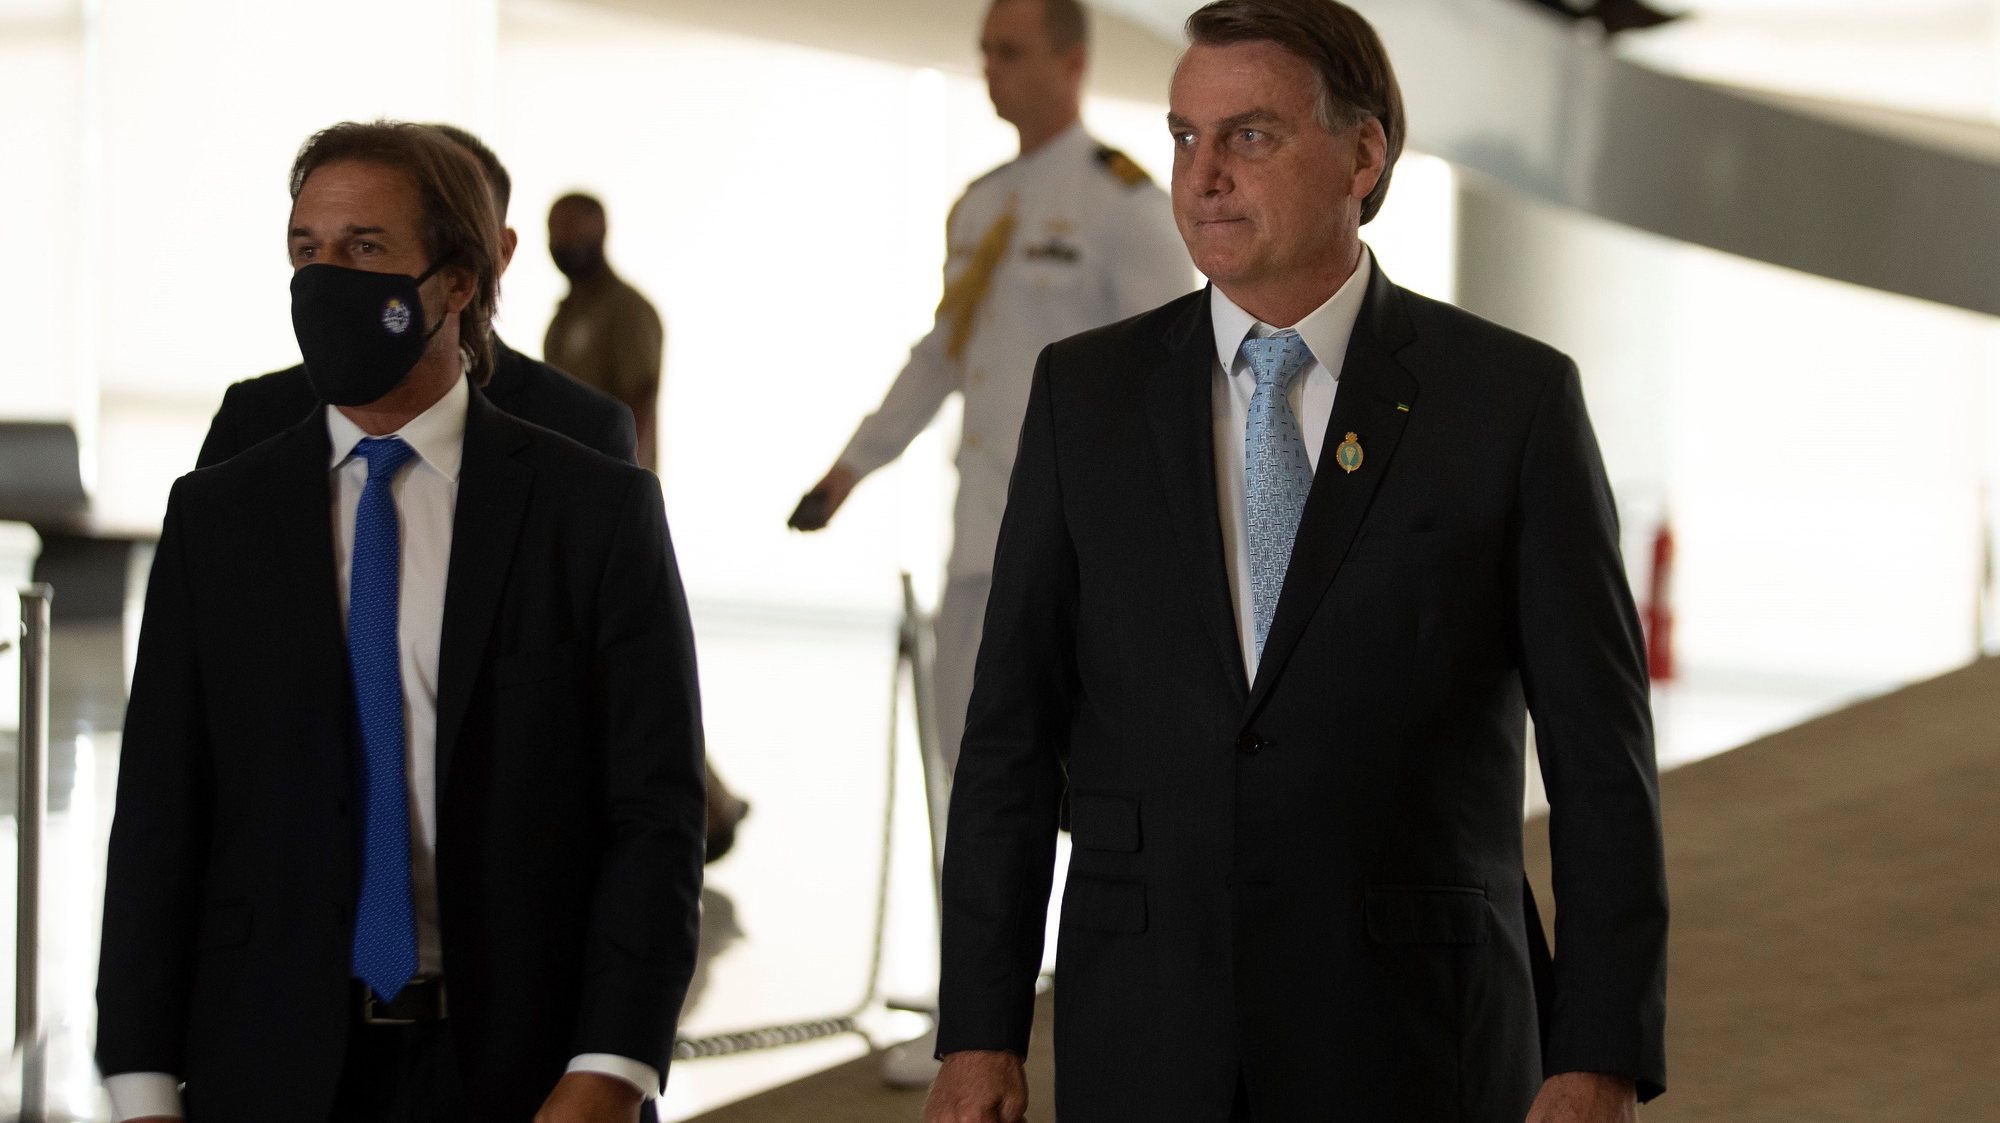 epa08984990 The president of Brazil, Jair Bolsonaro (R) and the president of Uruguay, Luis Lacalle Pou (L) meet at the Planalto Palace, in Brasilia, Brazil, 03 February 2021. The president of Uruguay, Luis Lacalle Pou, was received on 03 February by his Brazilian counterpart, Jair Bolsonaro, for a private meeting in which they will discuss bilateral and regional issues, of commercial and economic content.  EPA/Joedson Alves